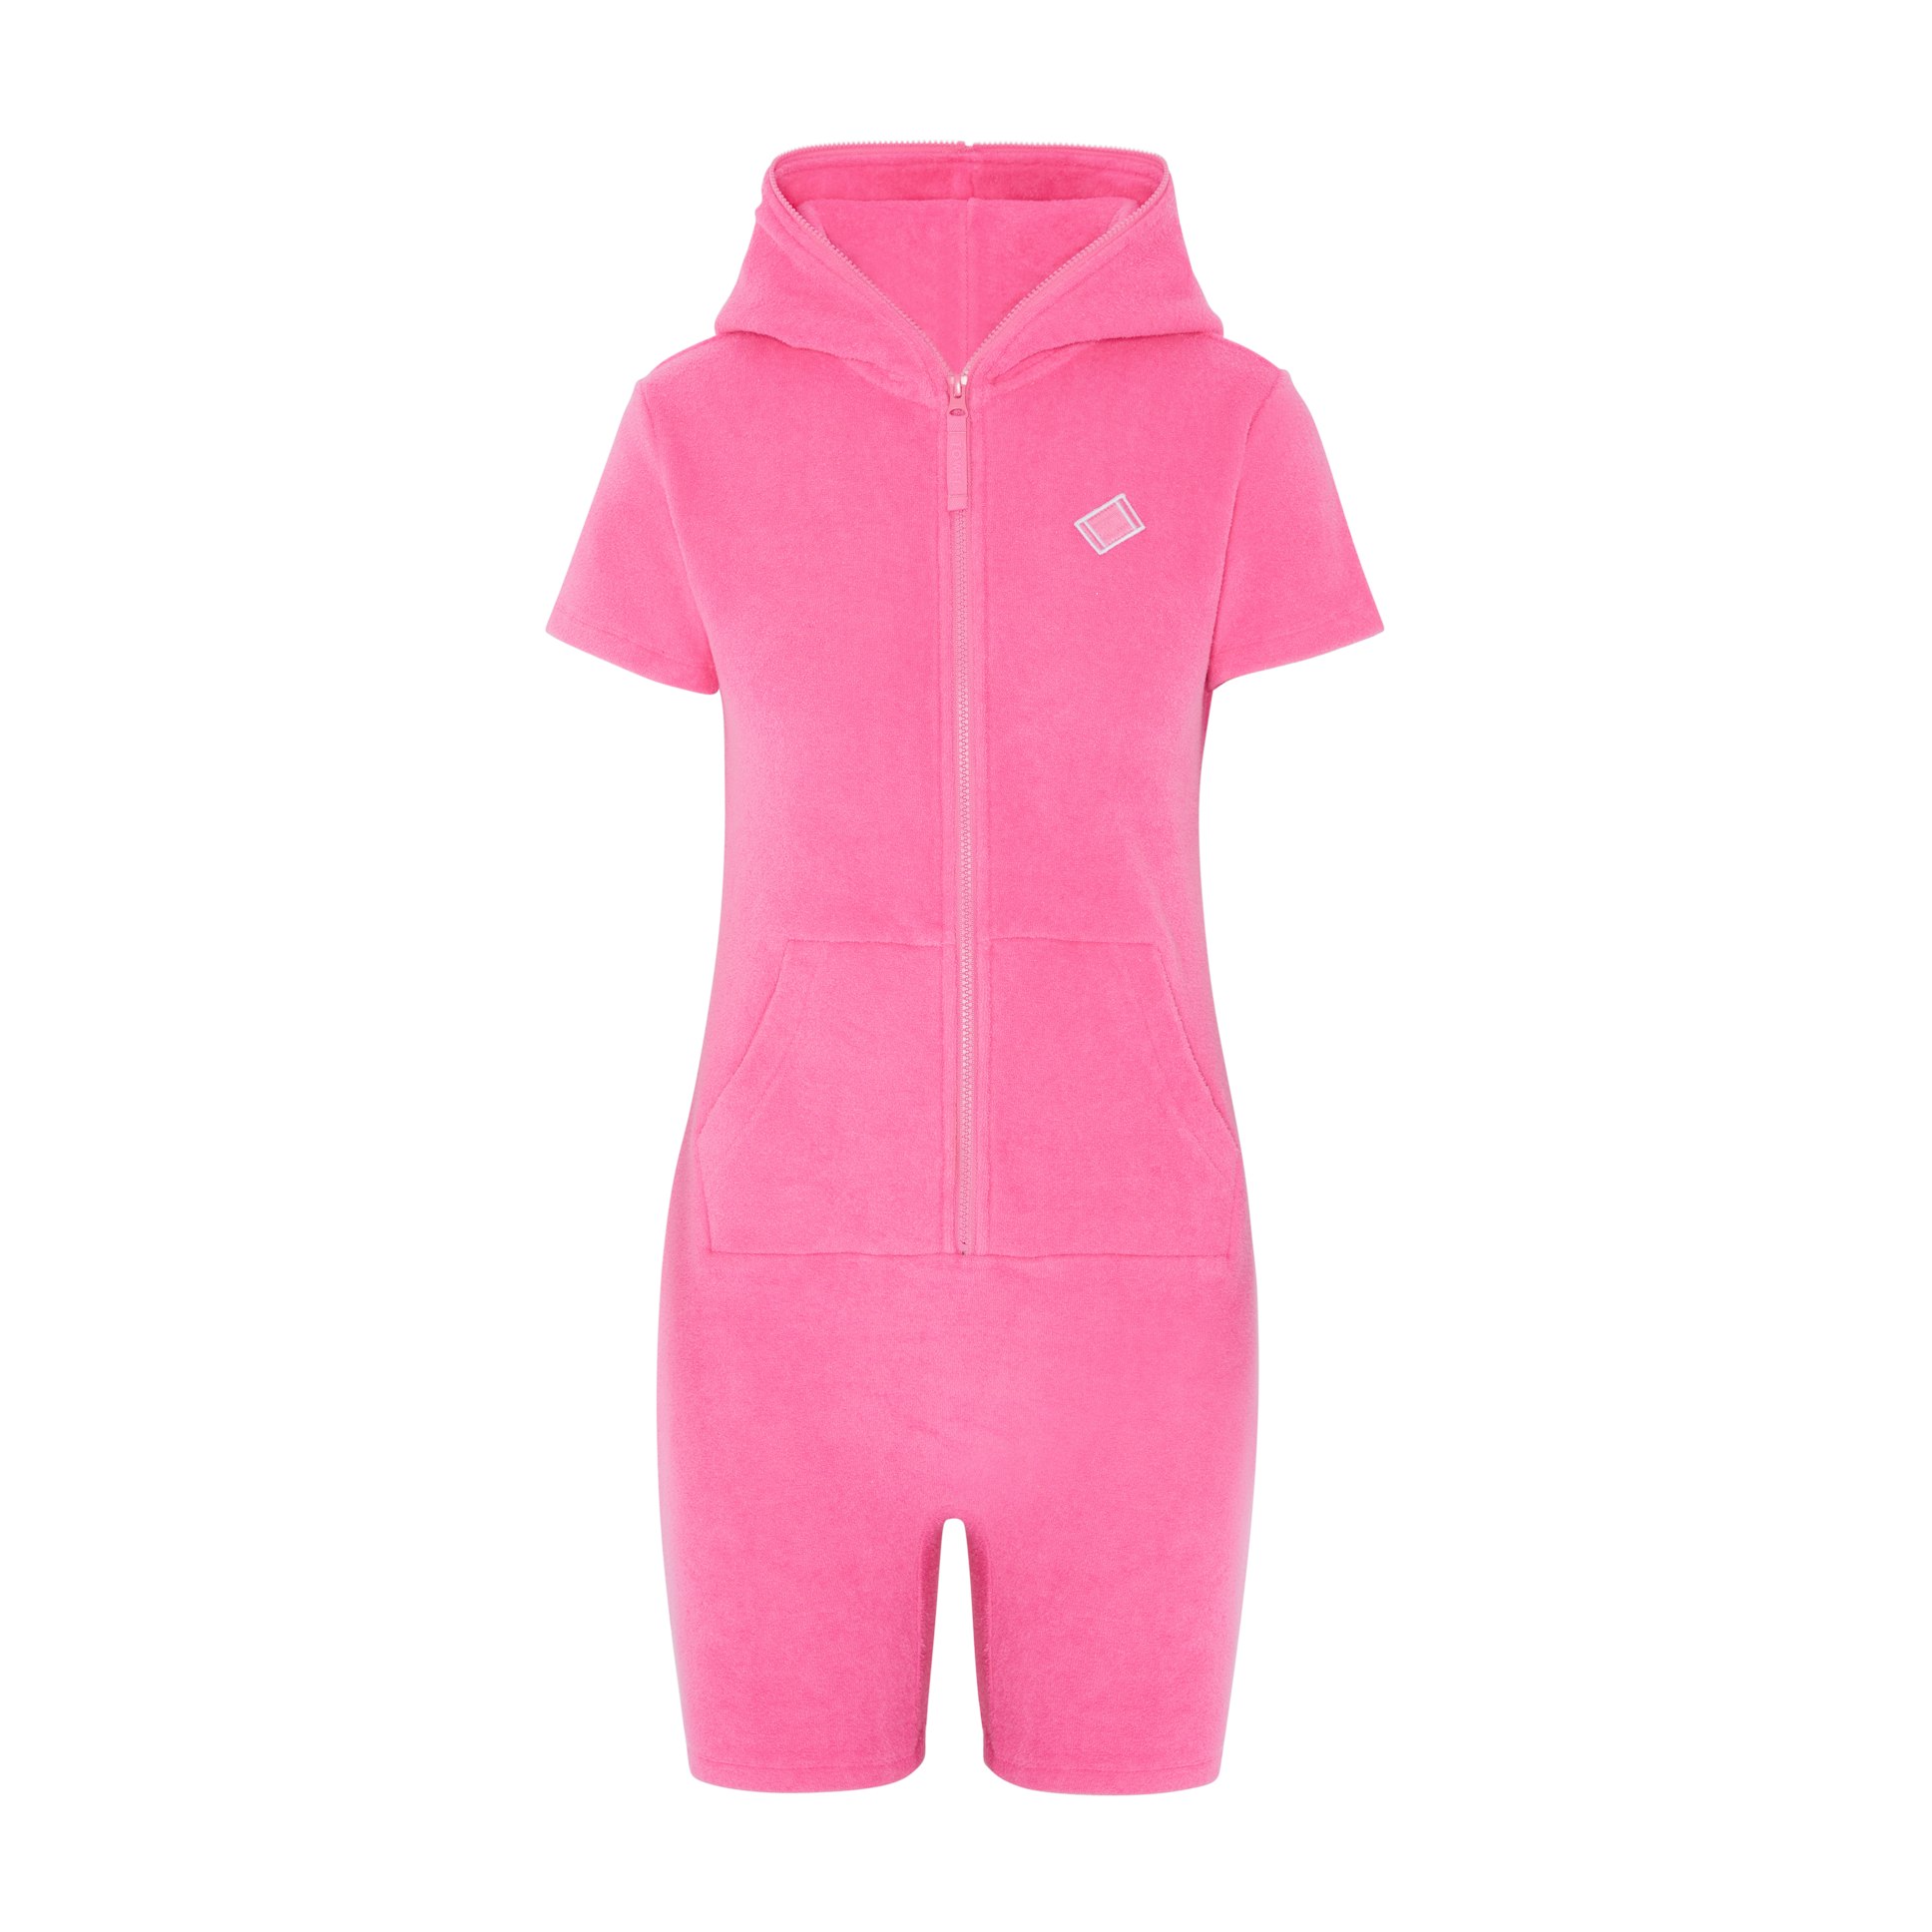 Towel Club Fitted Short Jumpsuit Pink